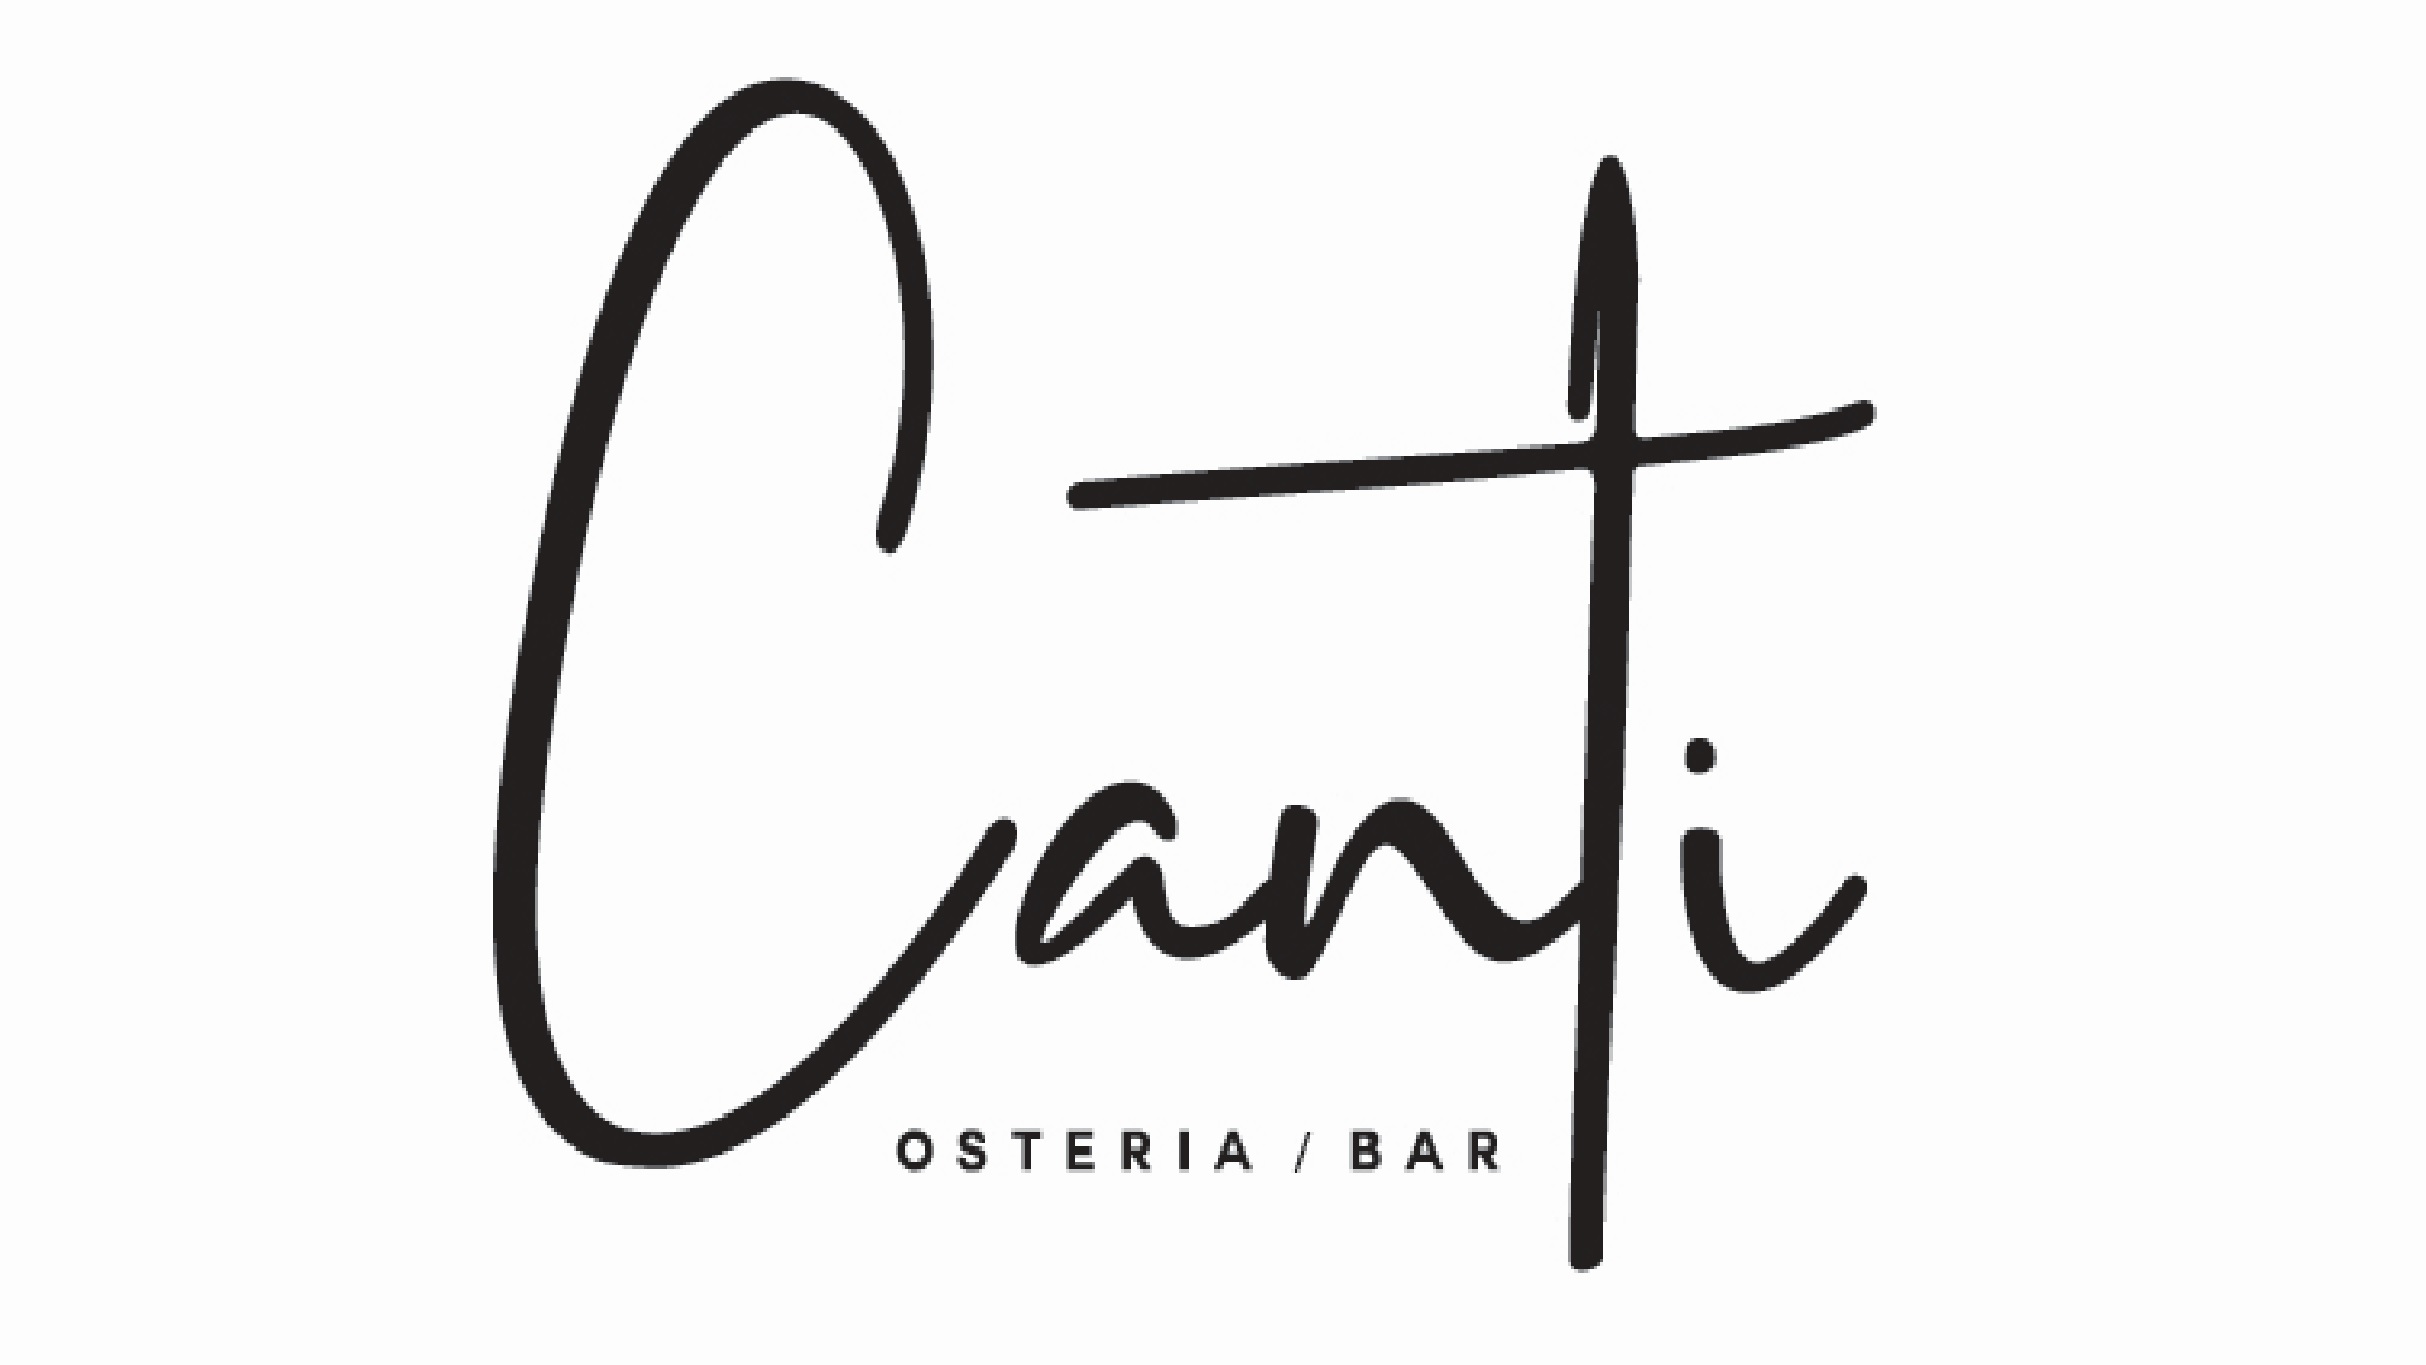 Centre Bell - Repas Restaurant Canti - Chayanne